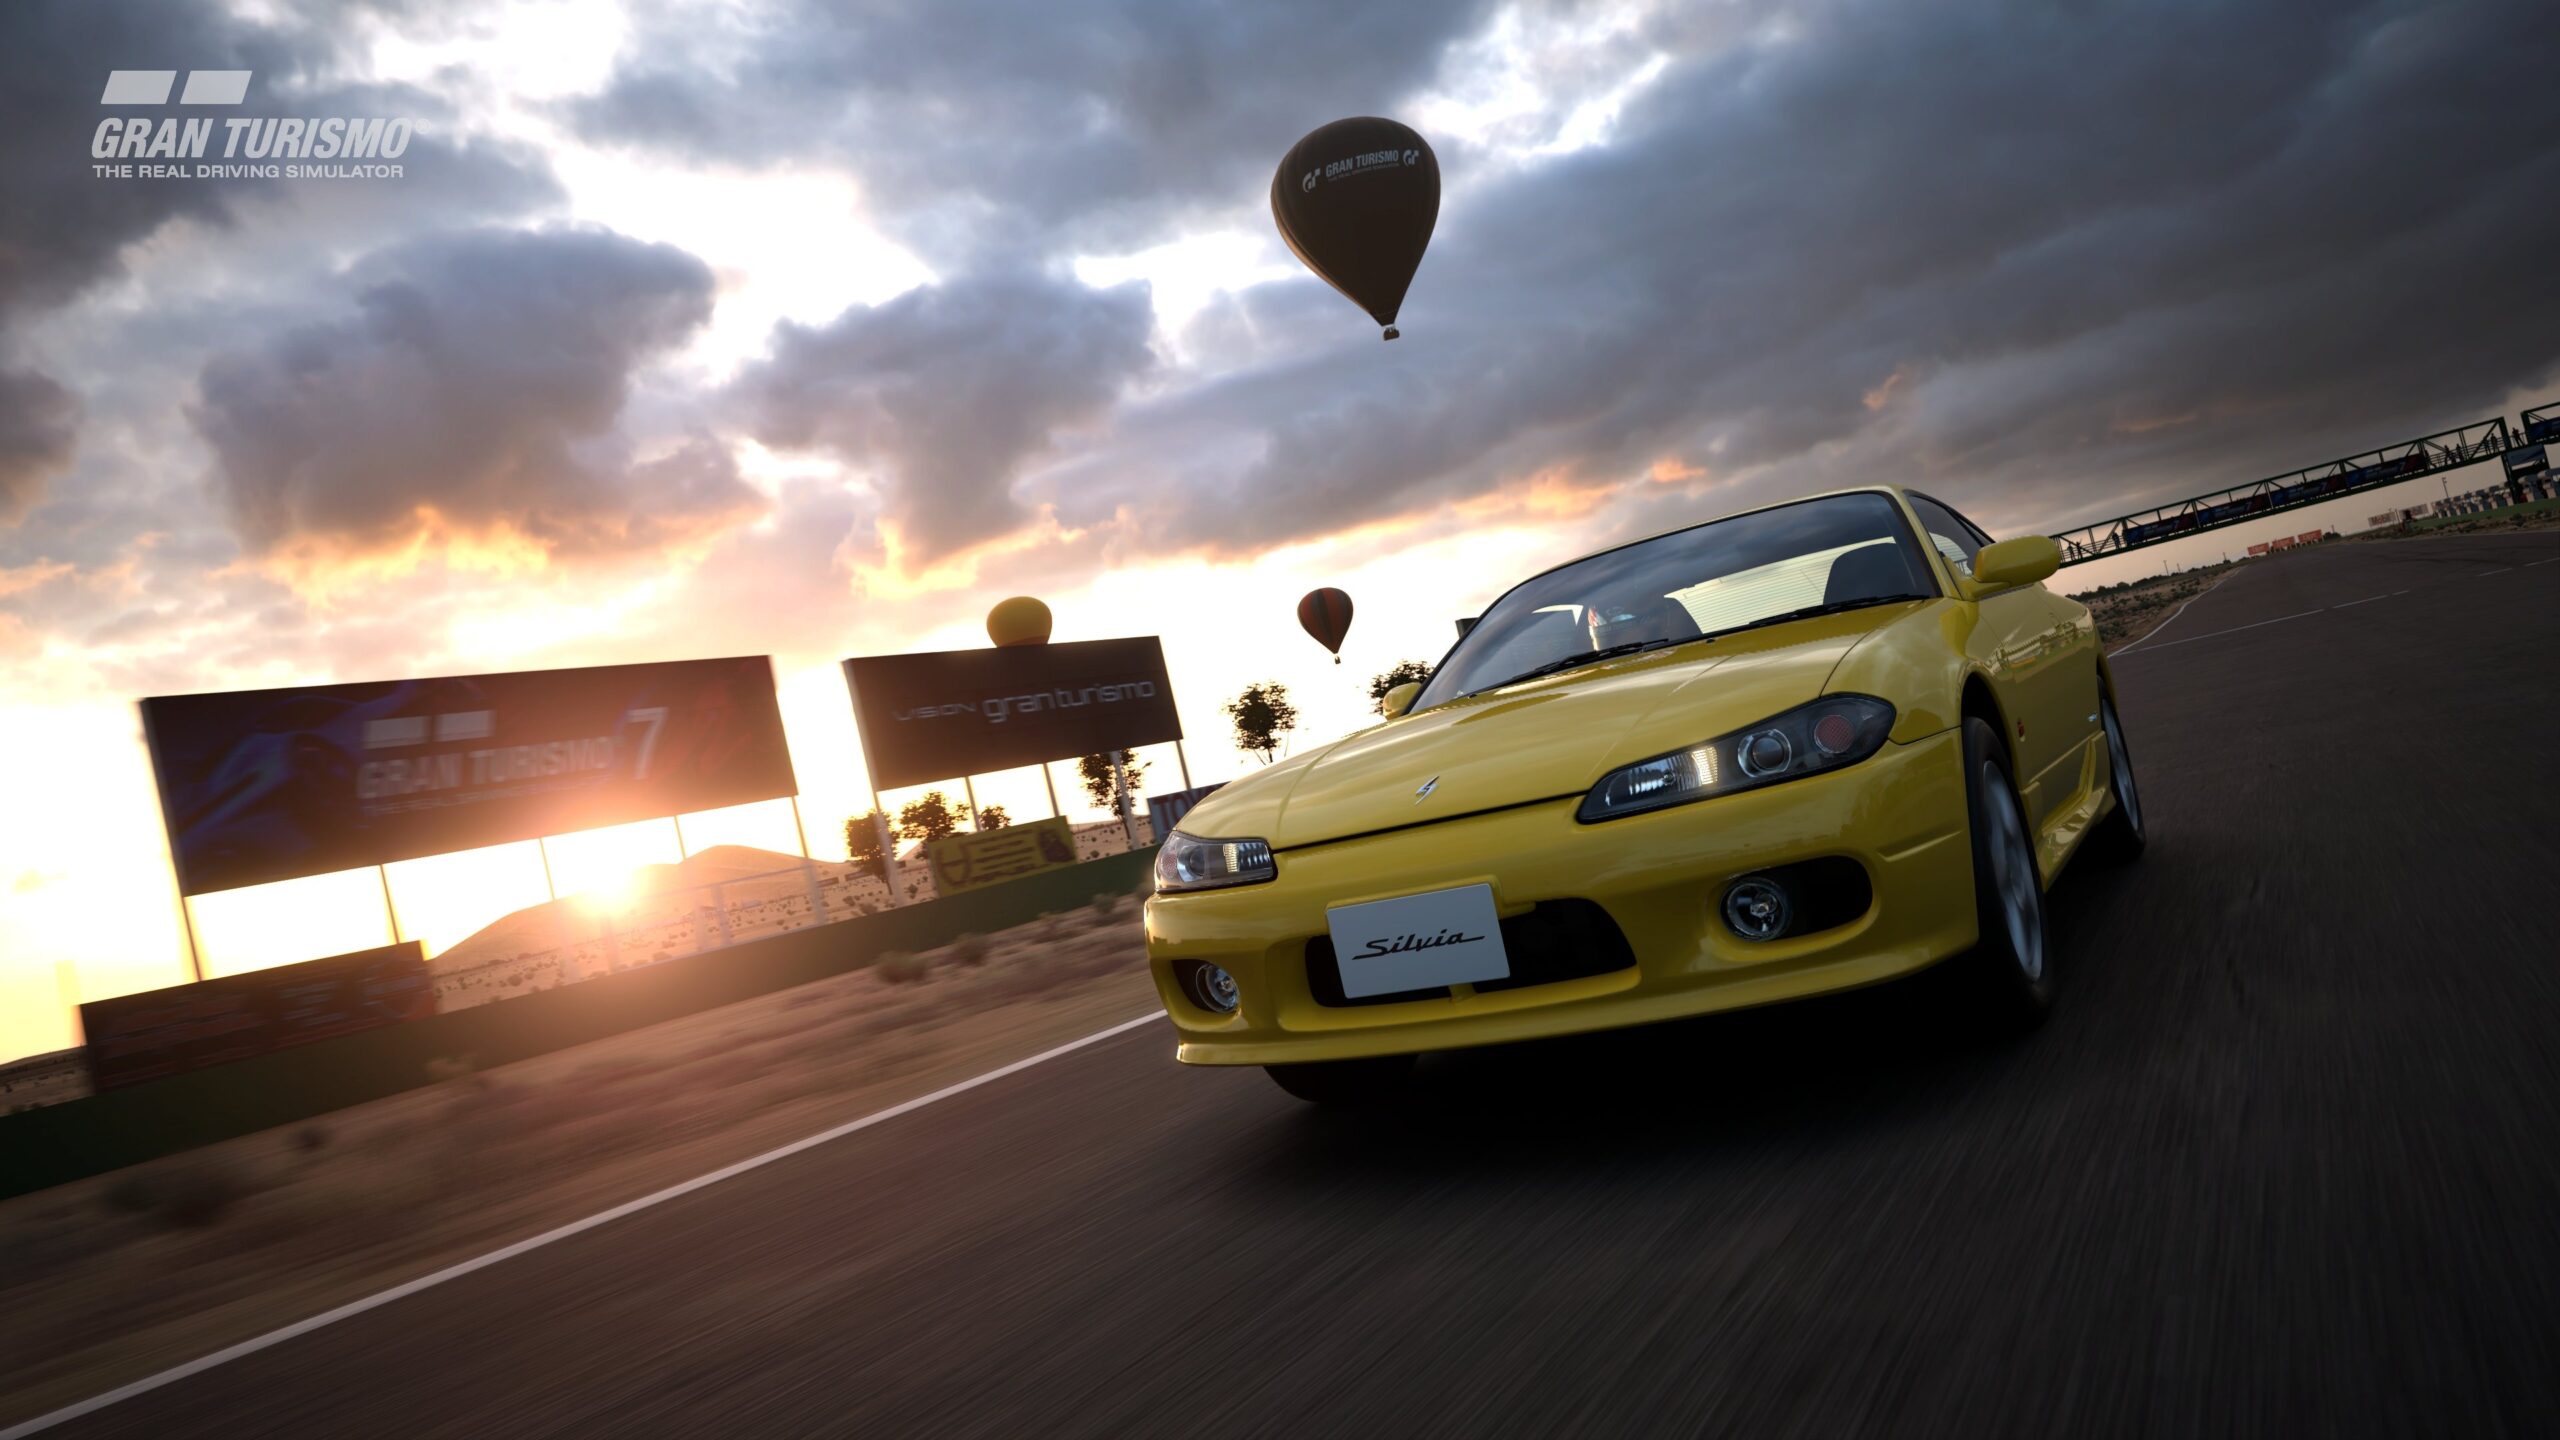 Gran Turismo 7 (GT7) Update 1.06 Patch Details Today, March 10